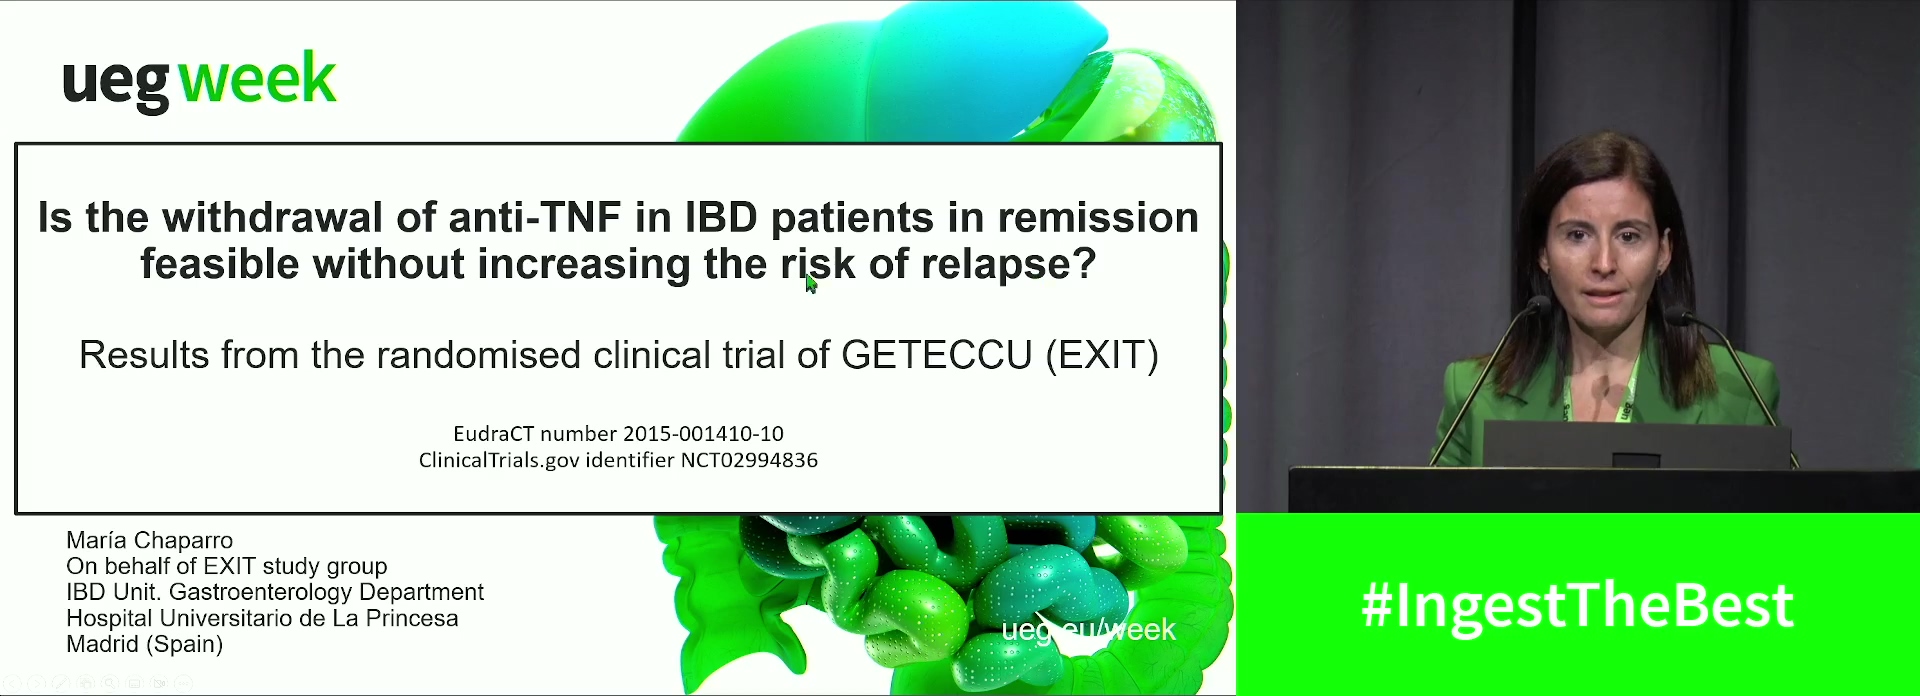 IS THE WITHDRAWAL OF ANTI-TUMOUR NECROSIS FACTOR IN INFLAMMATORY BOWEL DISEASE PATIENTS IN REMISSION FEASIBLE WITHOUT INCREASING THE RISK OF RELAPSE? RESULTS FROM THE RANDOMISED CLINICAL TRIAL OF GETECCU (EXIT)